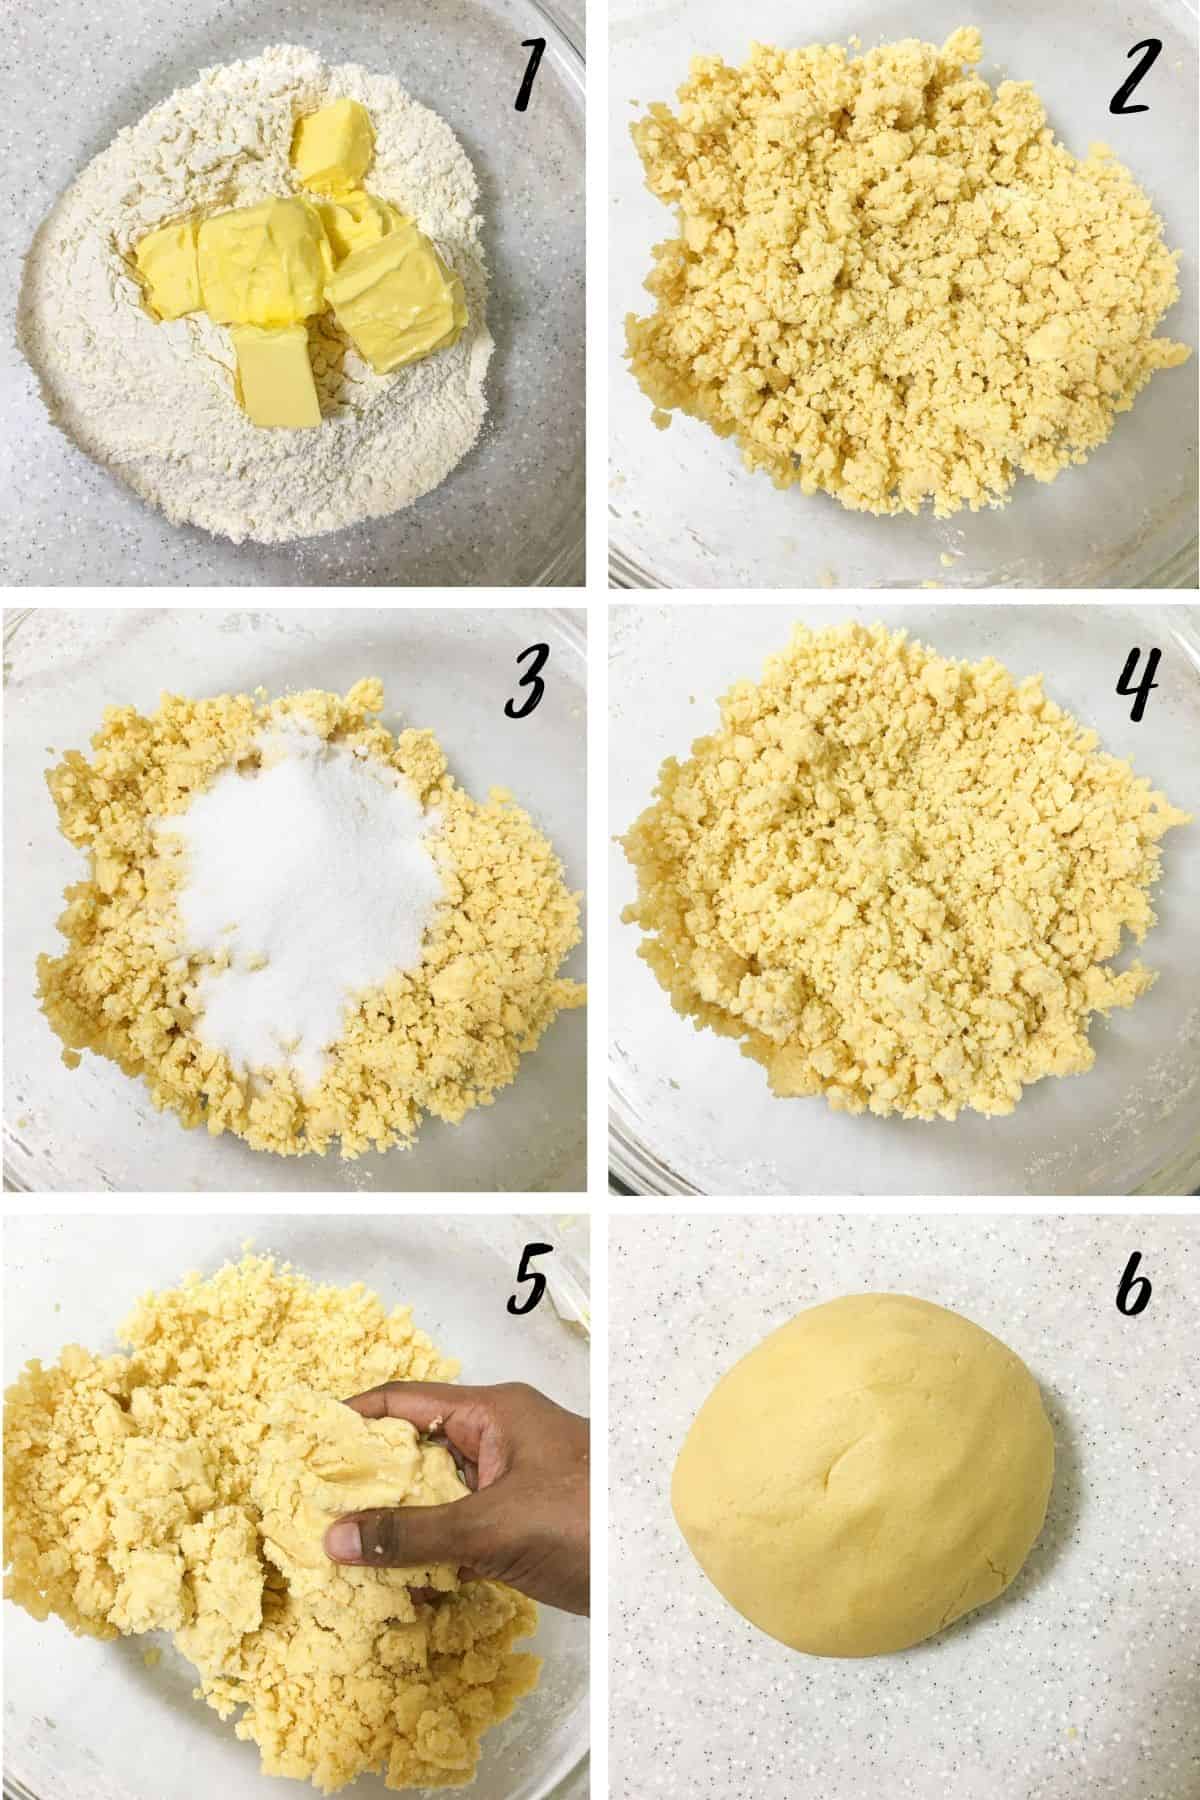 A poster of 6 images showing how to mix shortbread cookie dough.